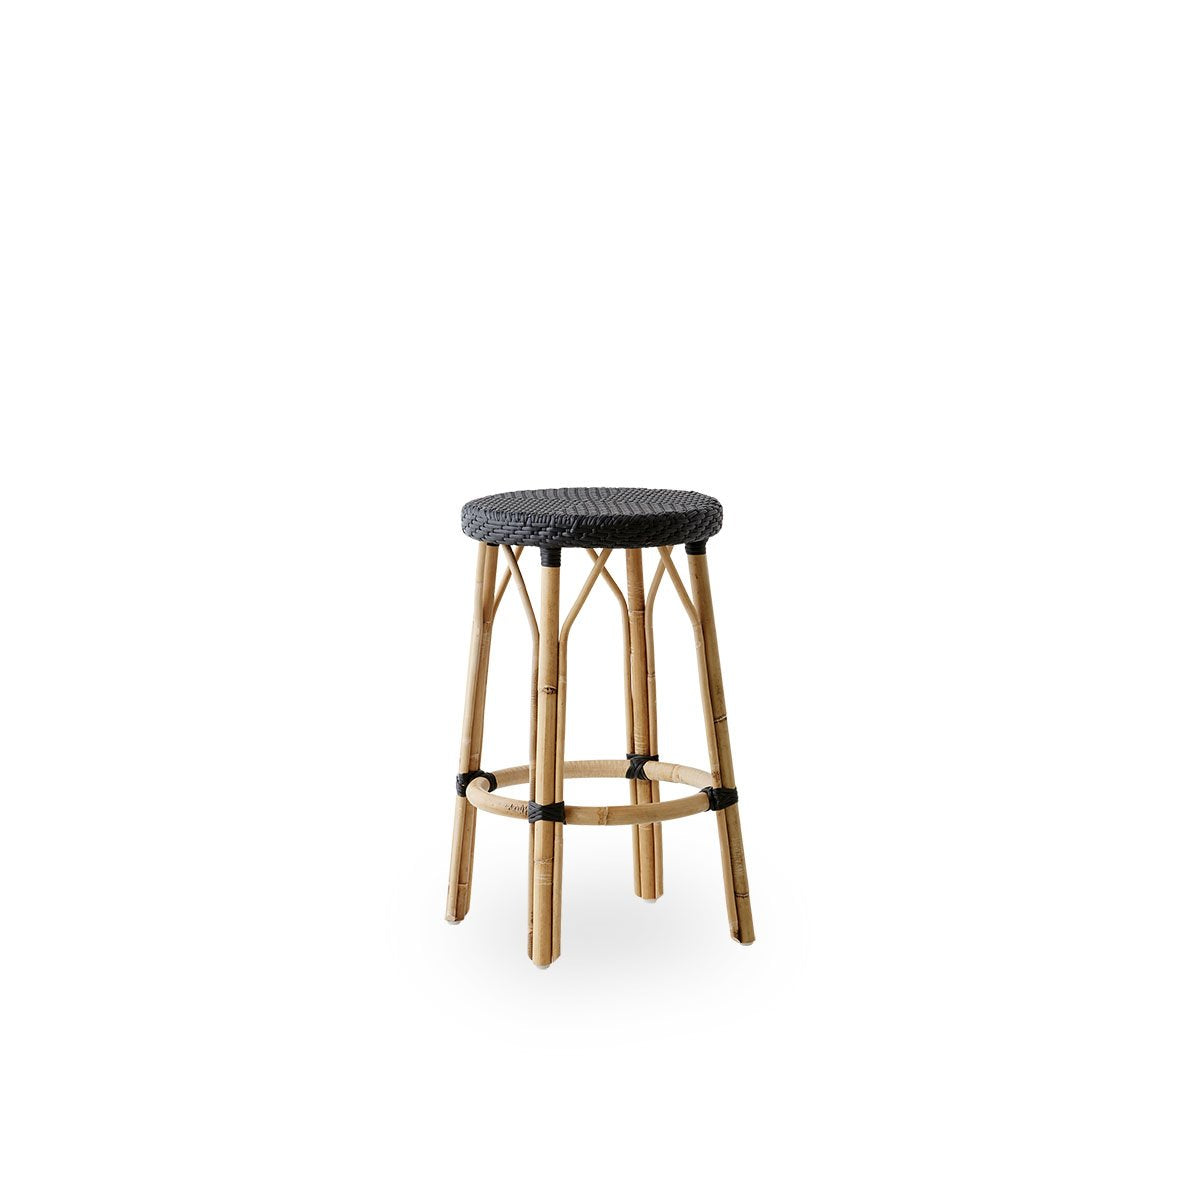 Simone Counter Stool by Sika